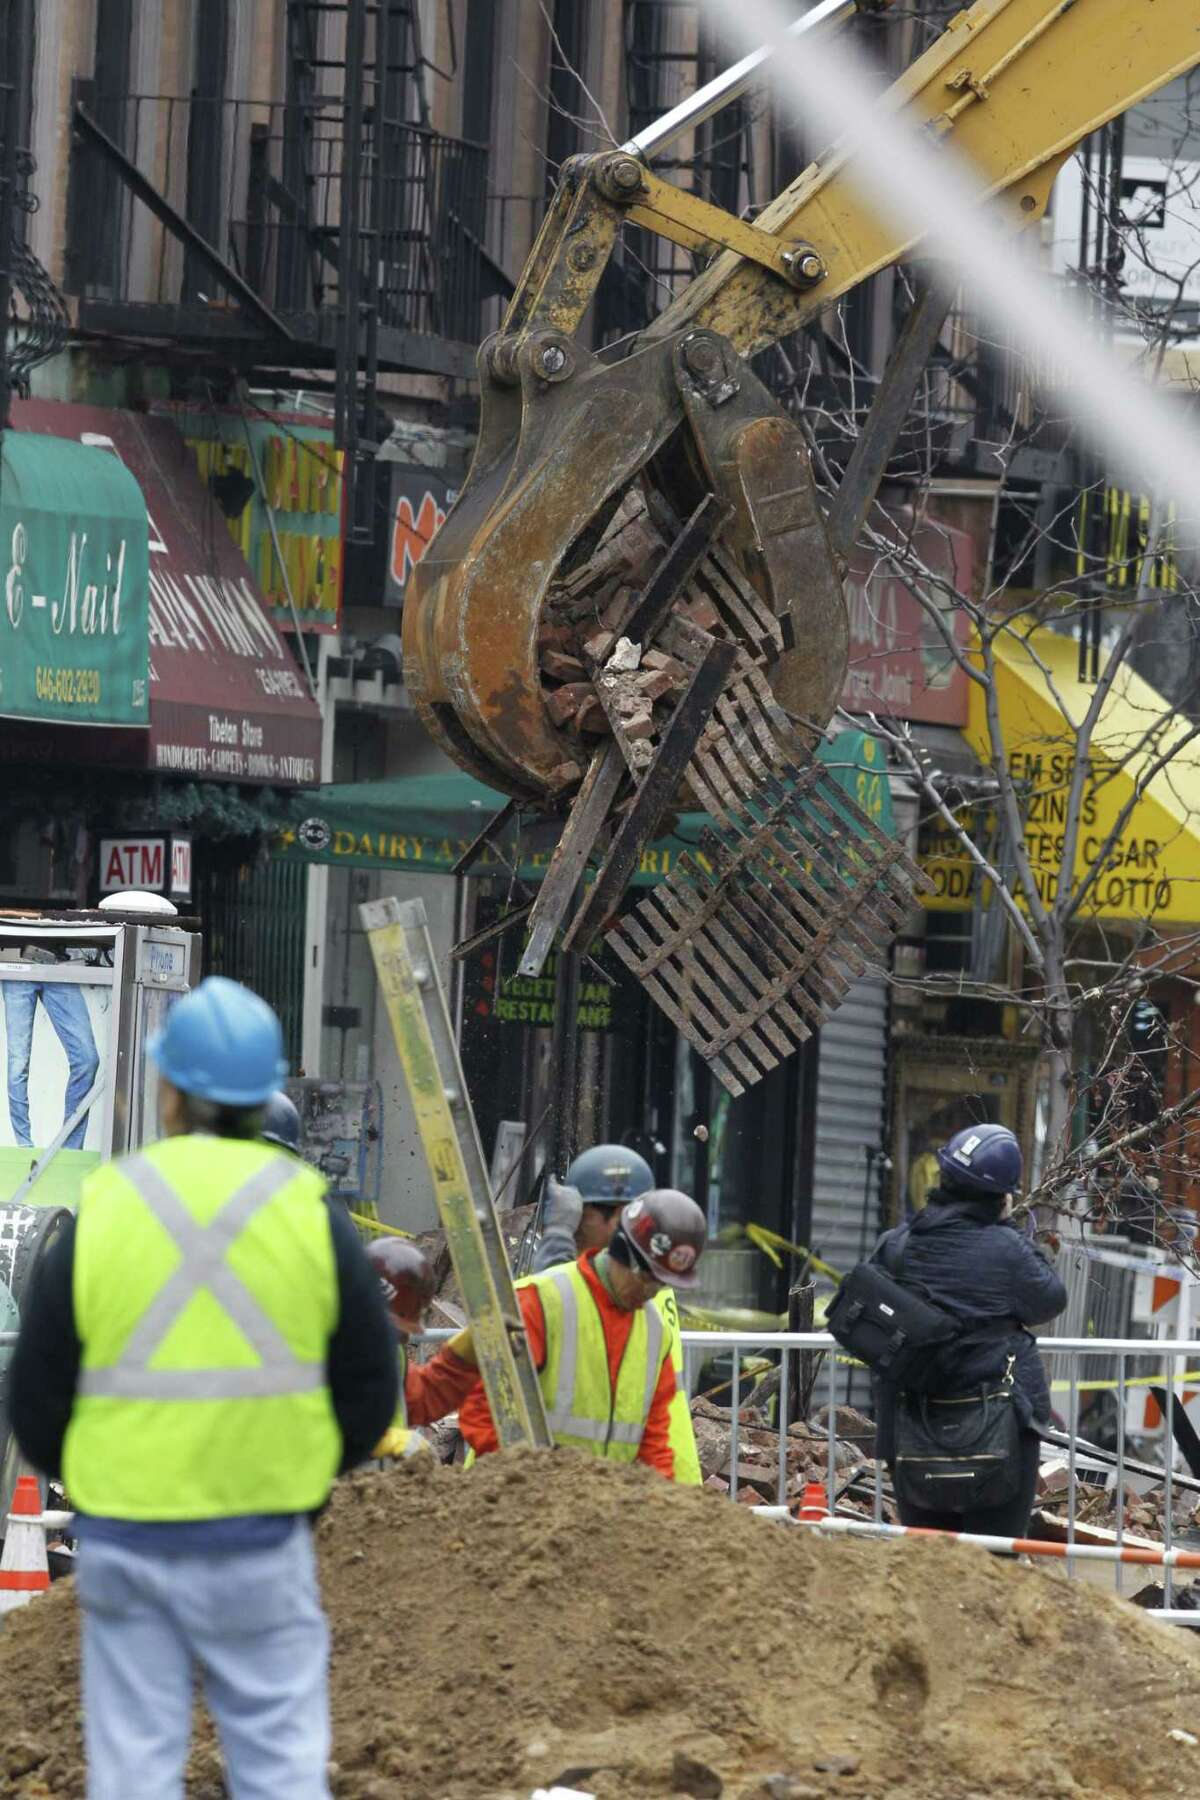 Debris are cleaned up from the site of a building collapse in the East Village neighborhood of New York on March 27, 2015. Nineteen people were injured, four critically, after the powerful blast and fire sent flames soaring and debris flying Thursday afternoon.